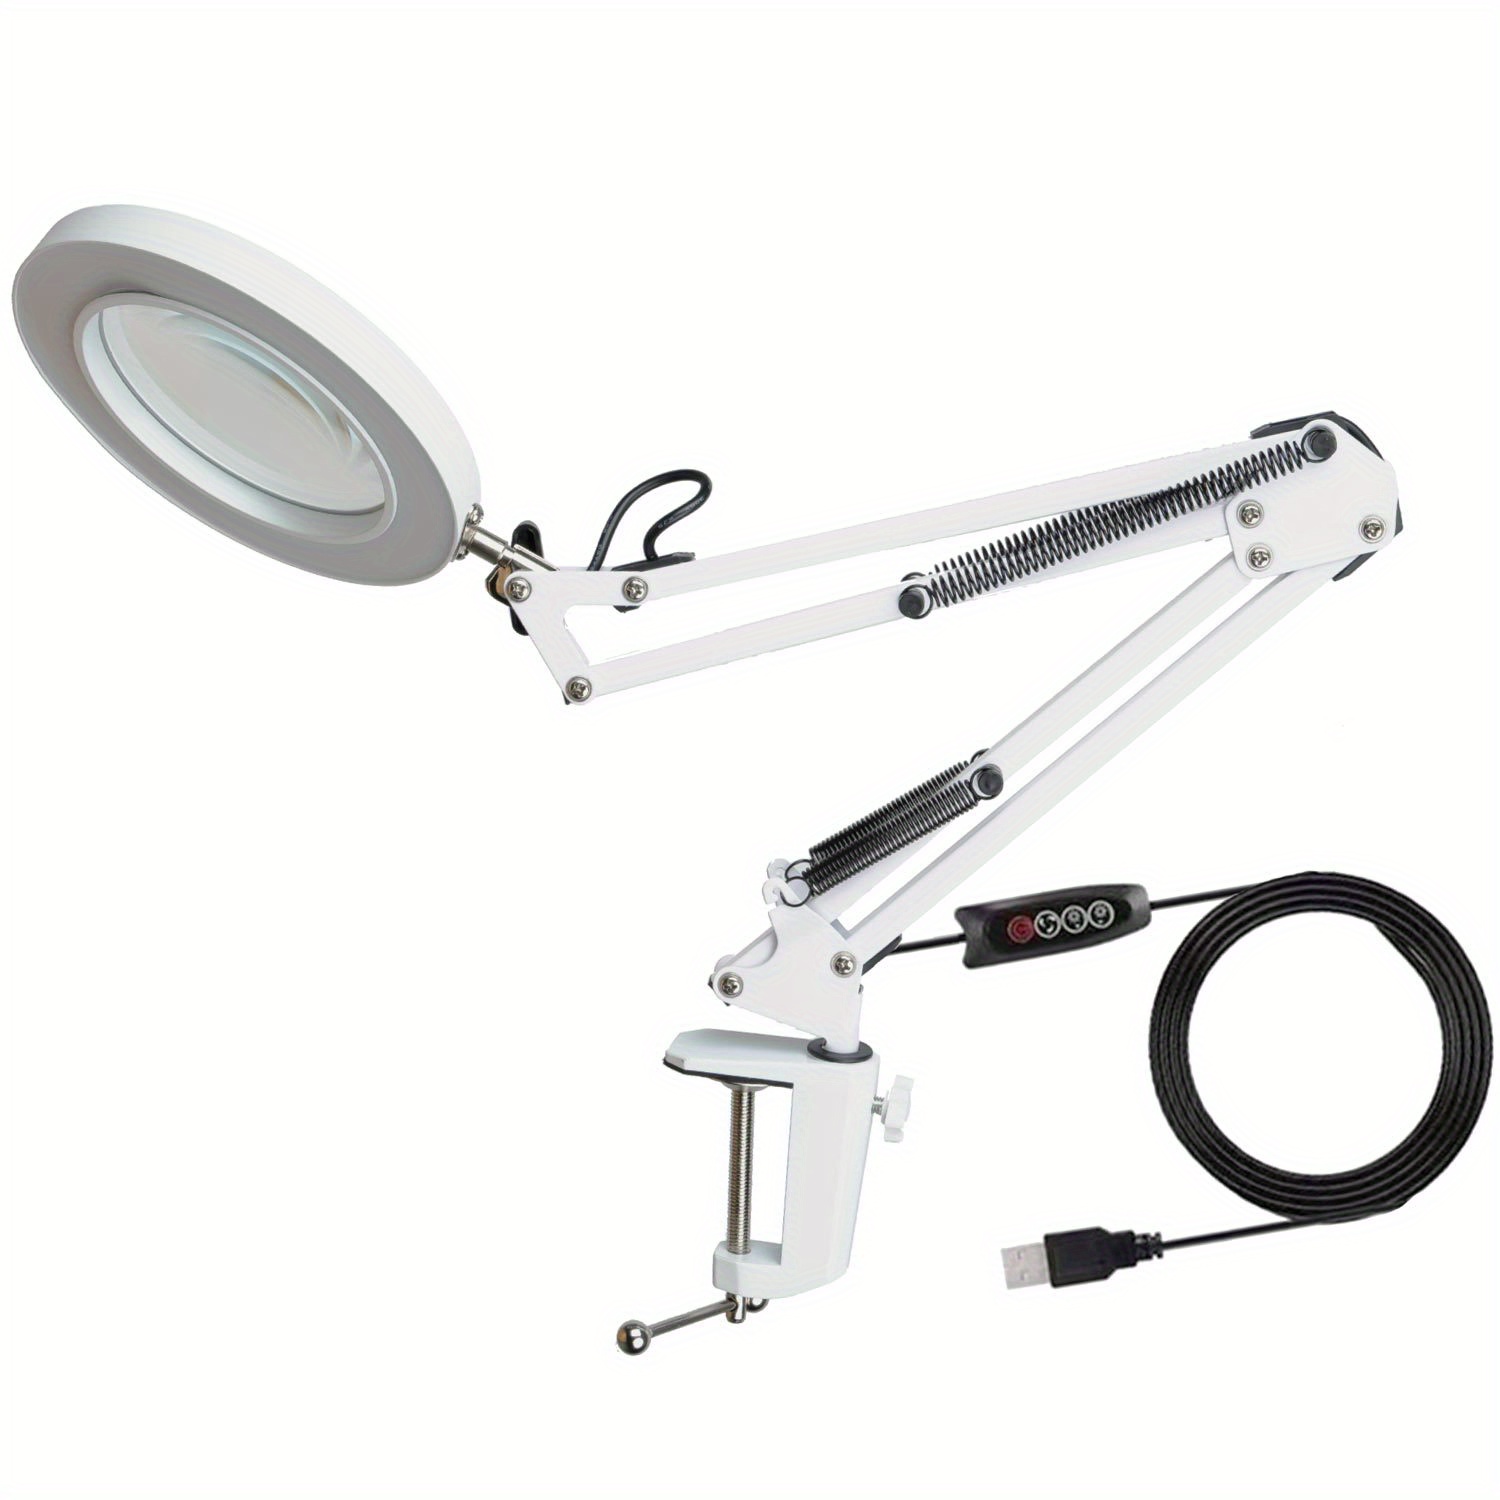 DY-1034 Cold-Light Magnifying Lamp W/Stand - Paragon Traders